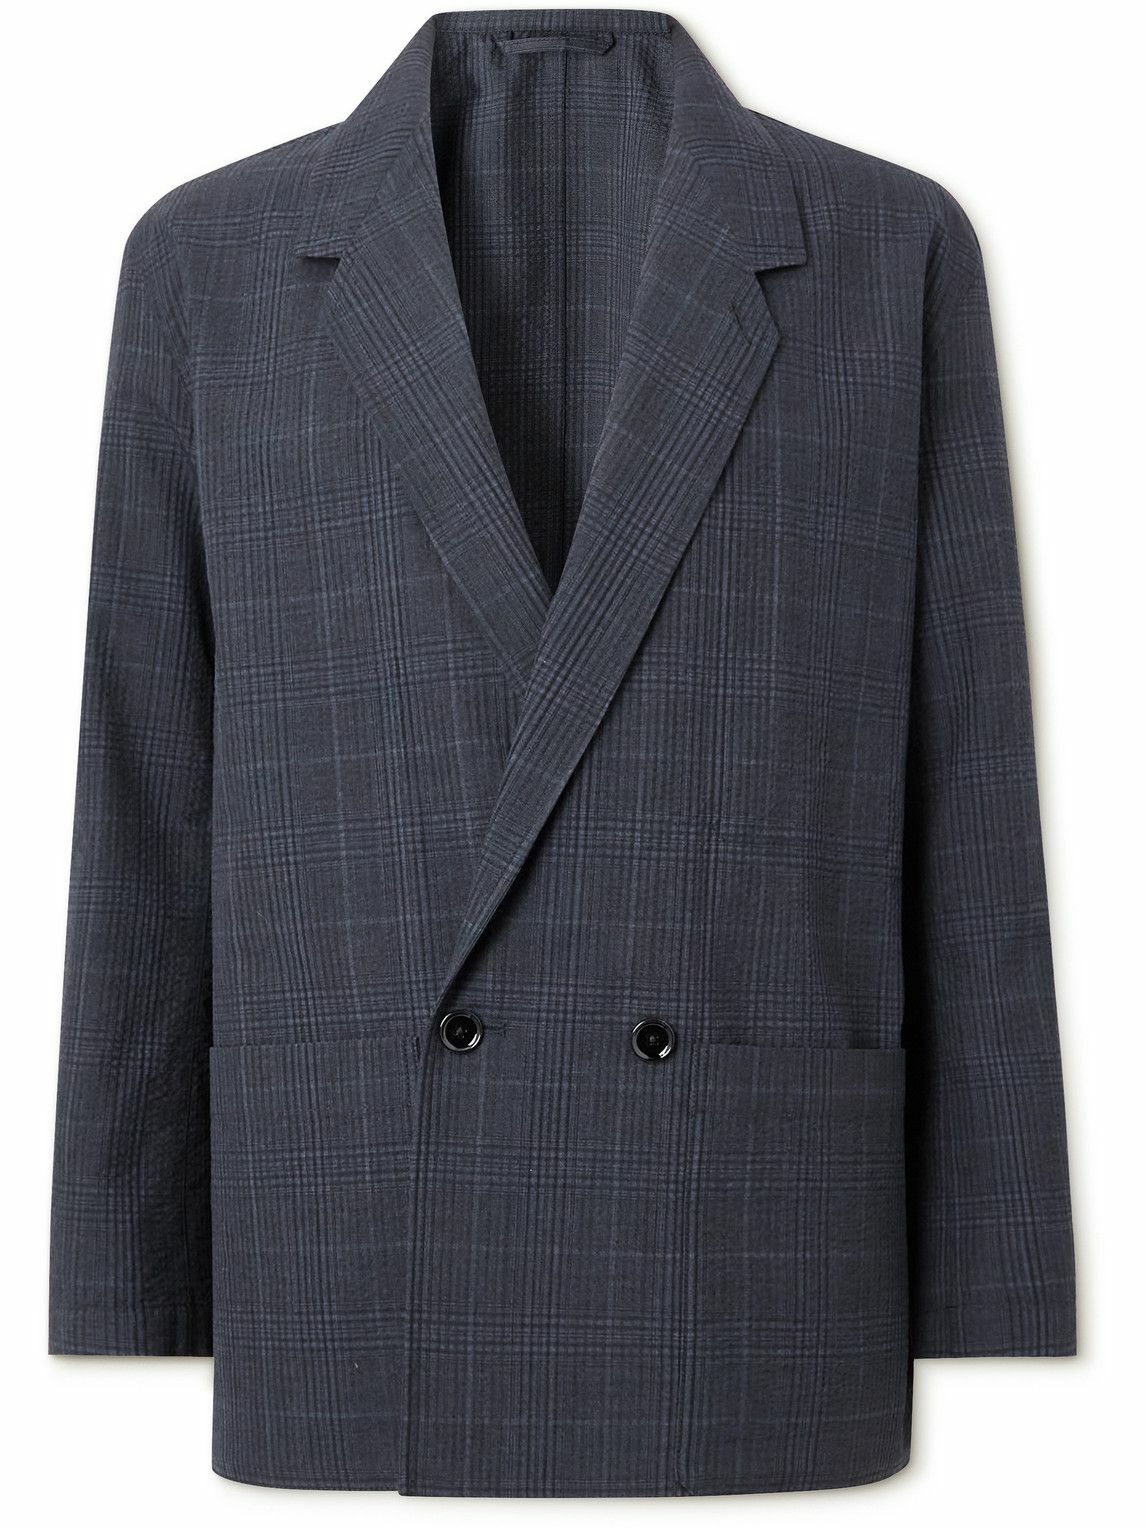 Lemaire - Double-Breasted Checked Wool-Seersucker Suit Jacket - Black ...